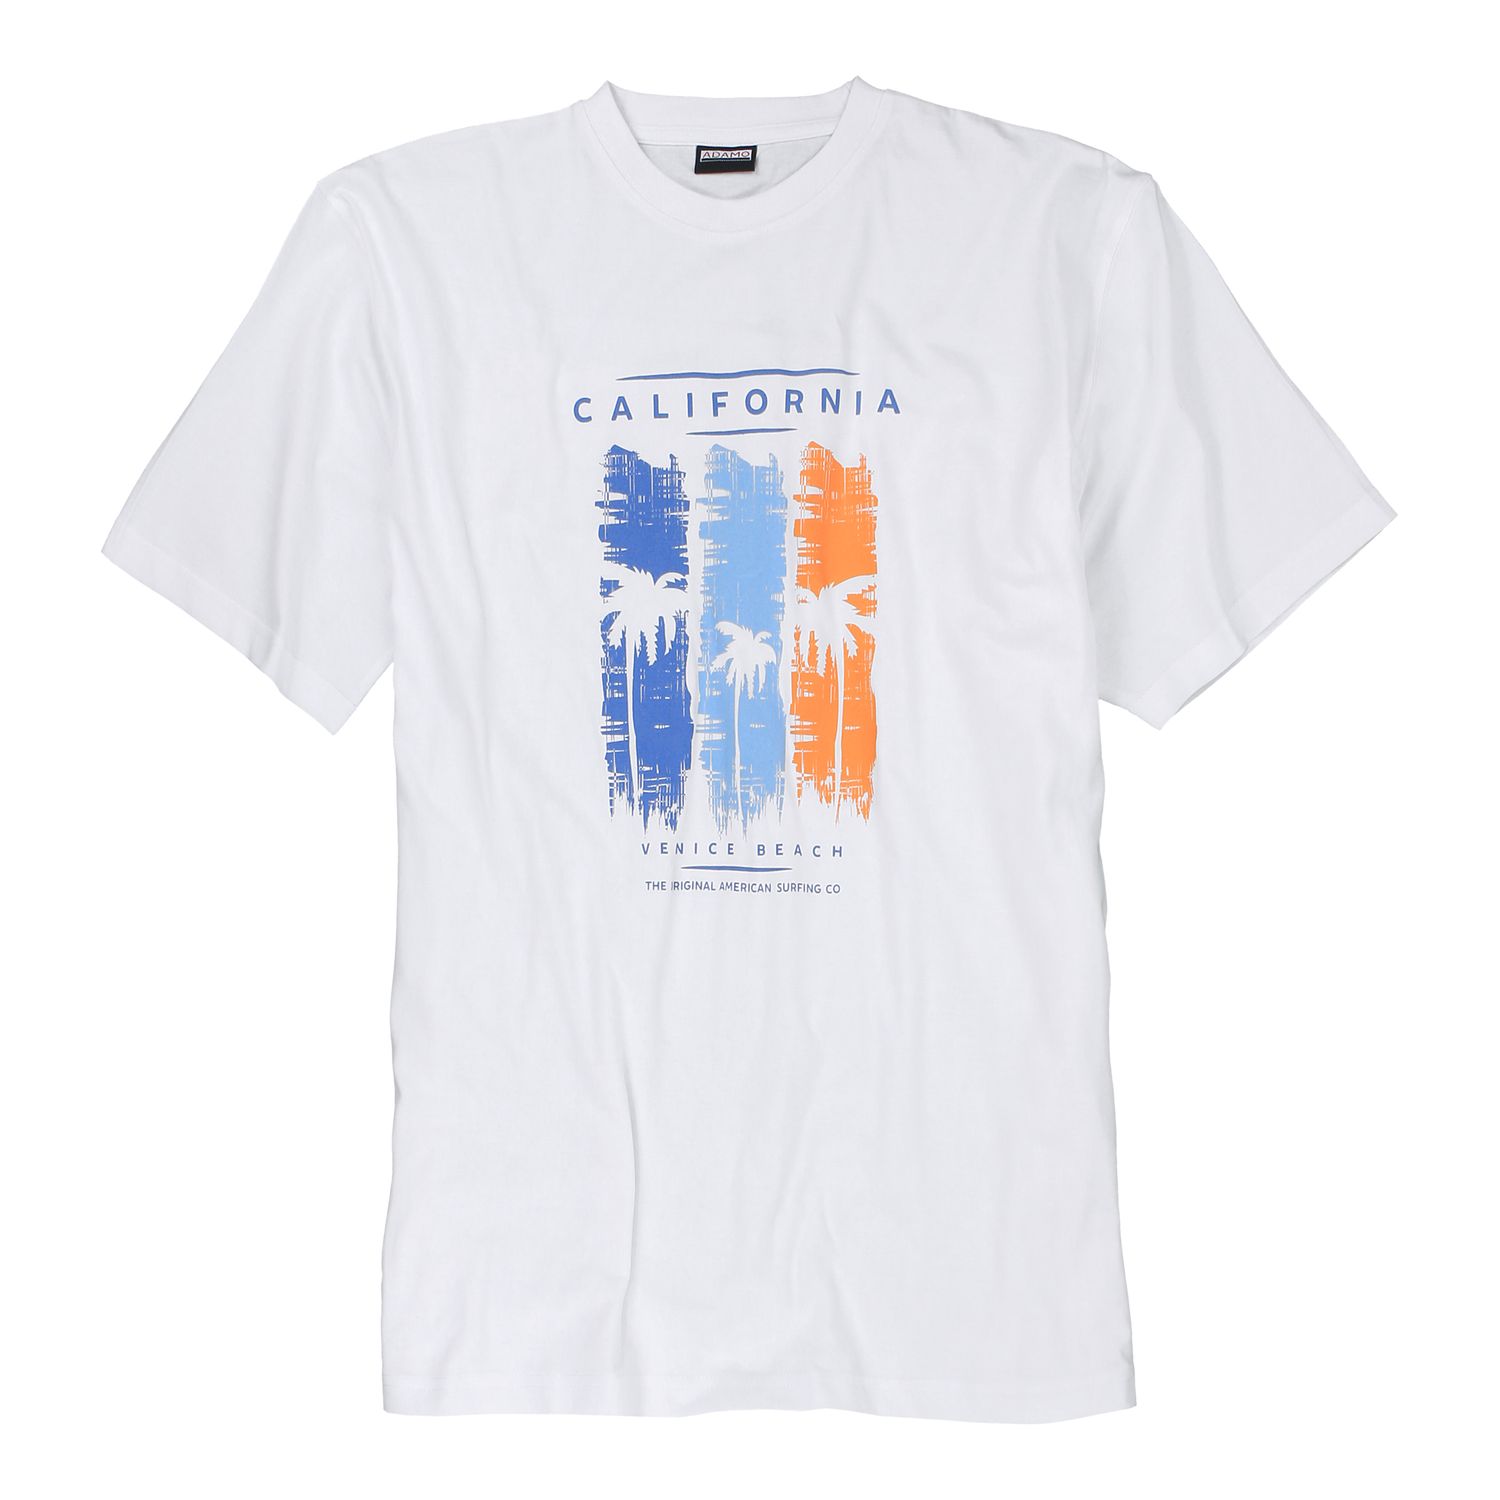 T-shirt "California" in white with imprint by Adamo for men up to oversize 12XL